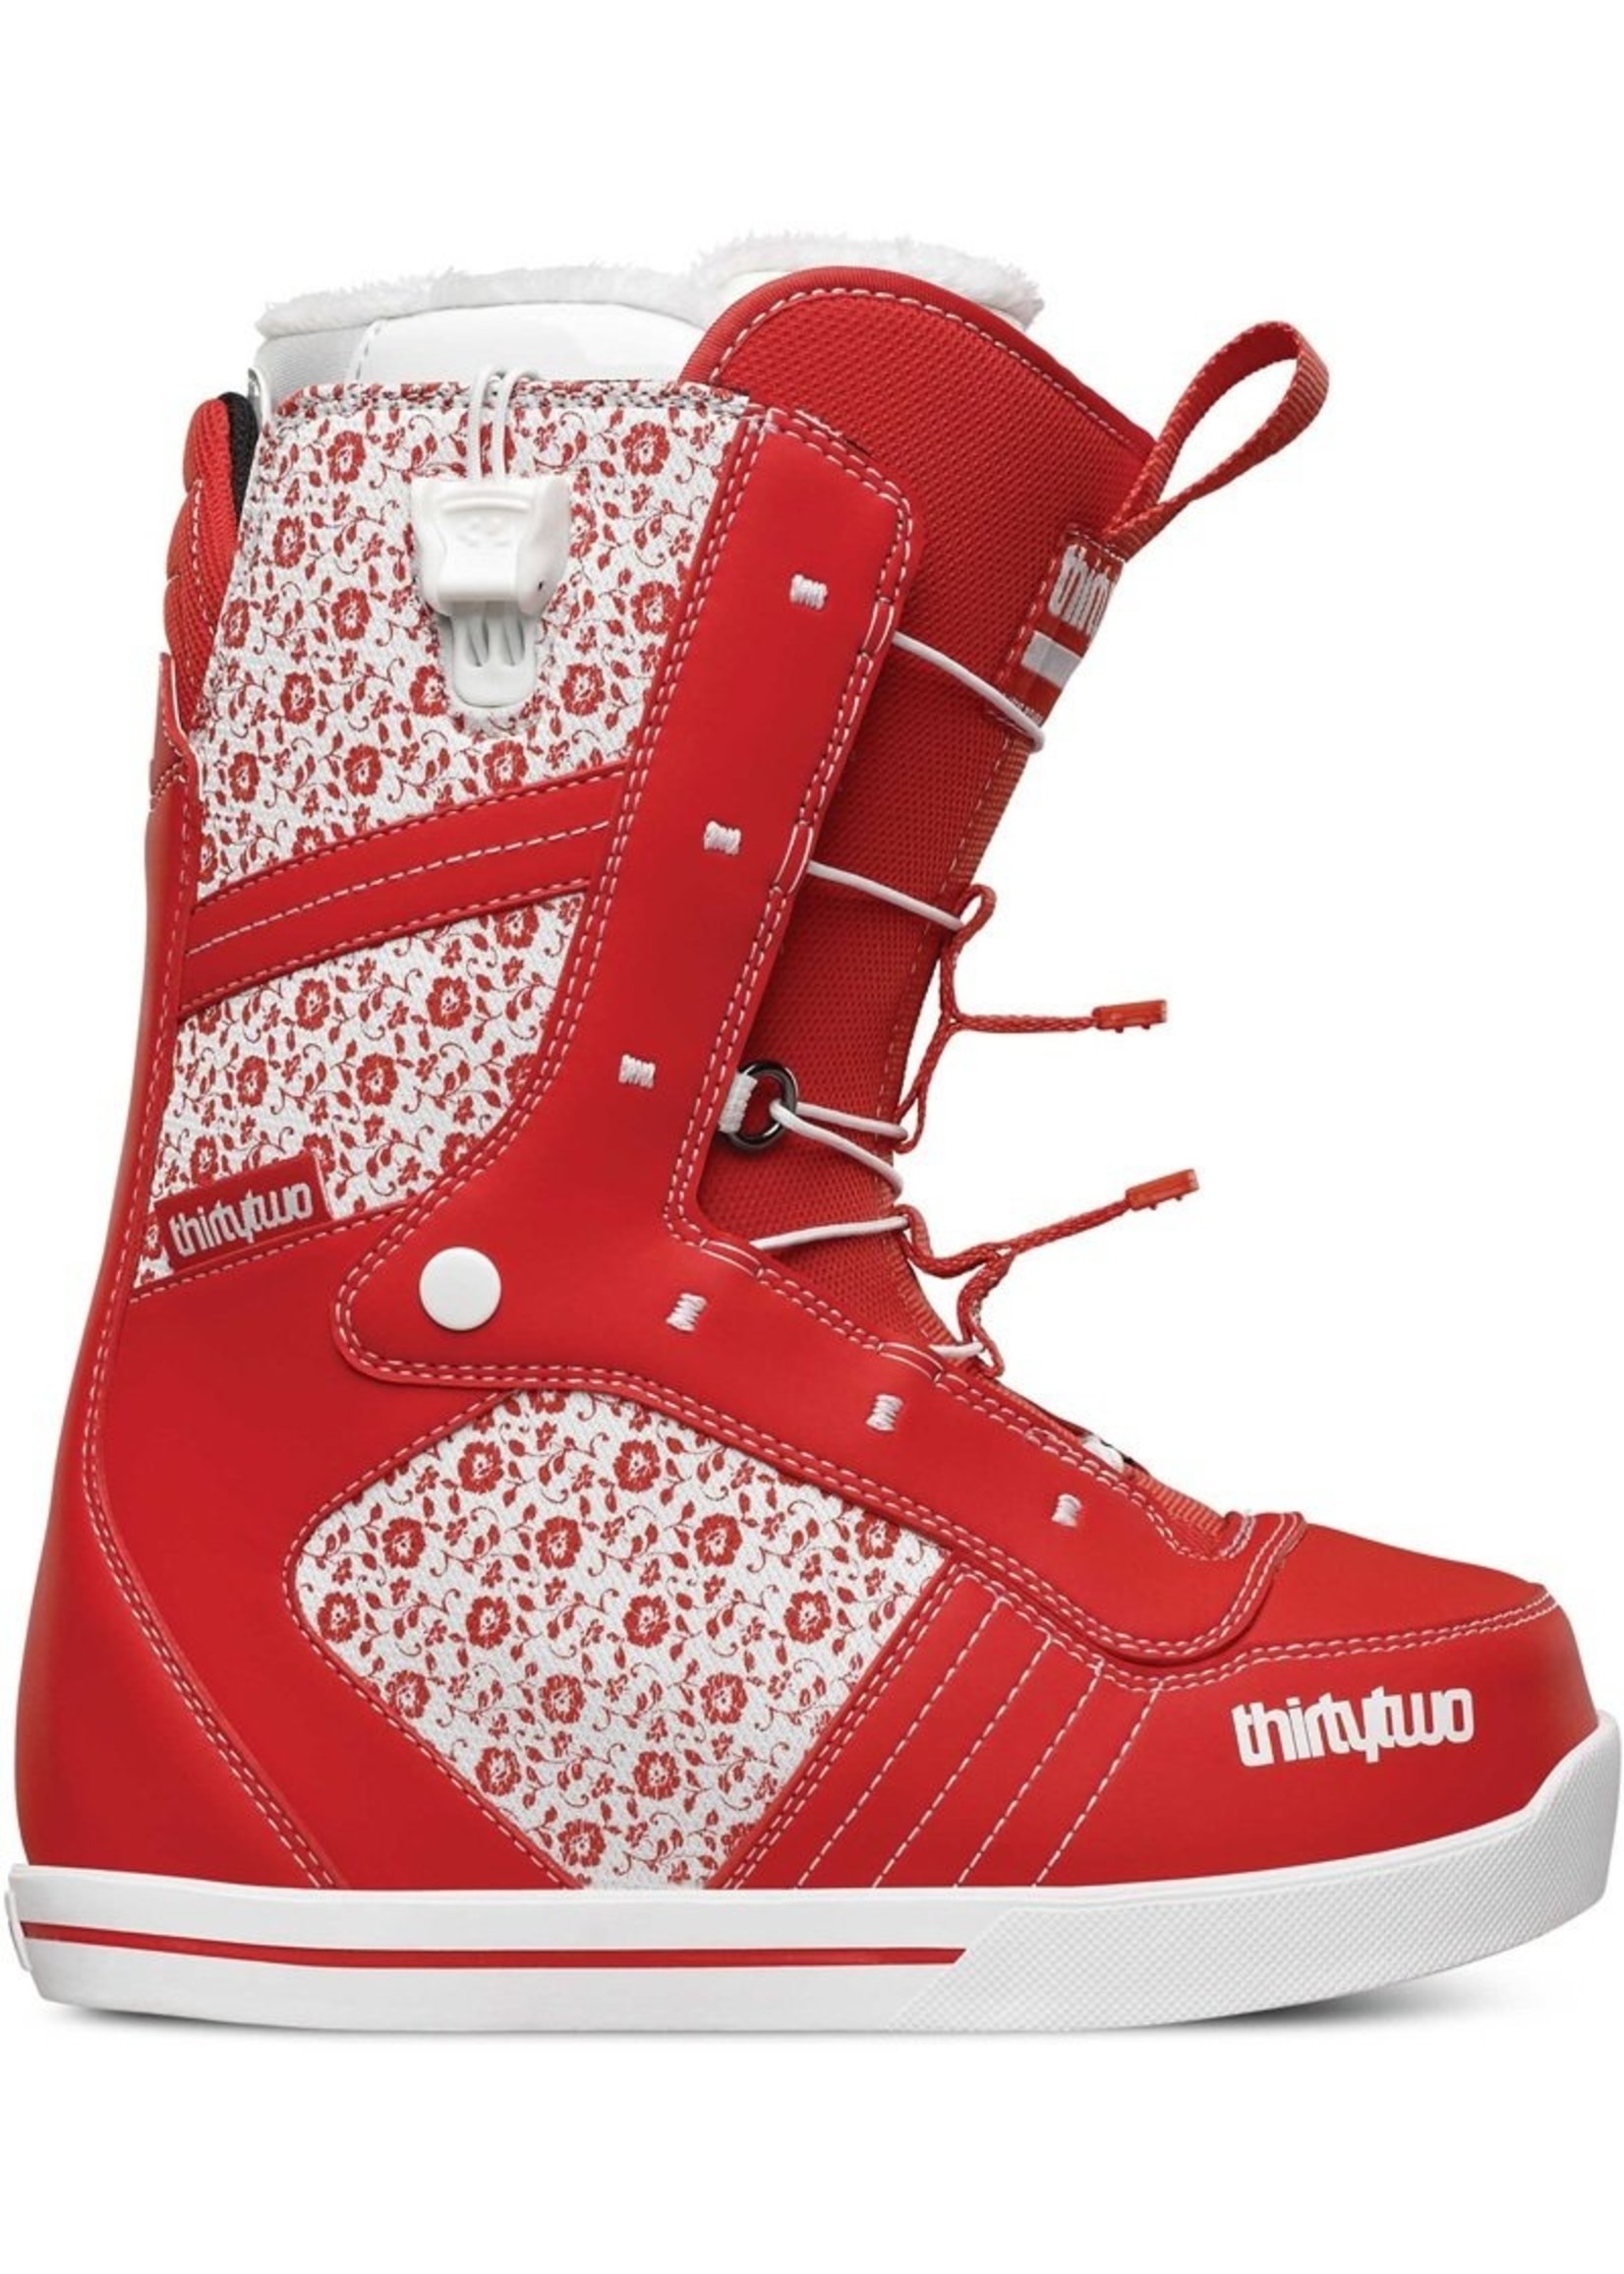 ThirtyTwo WMNS 86 FT 8.5 RED